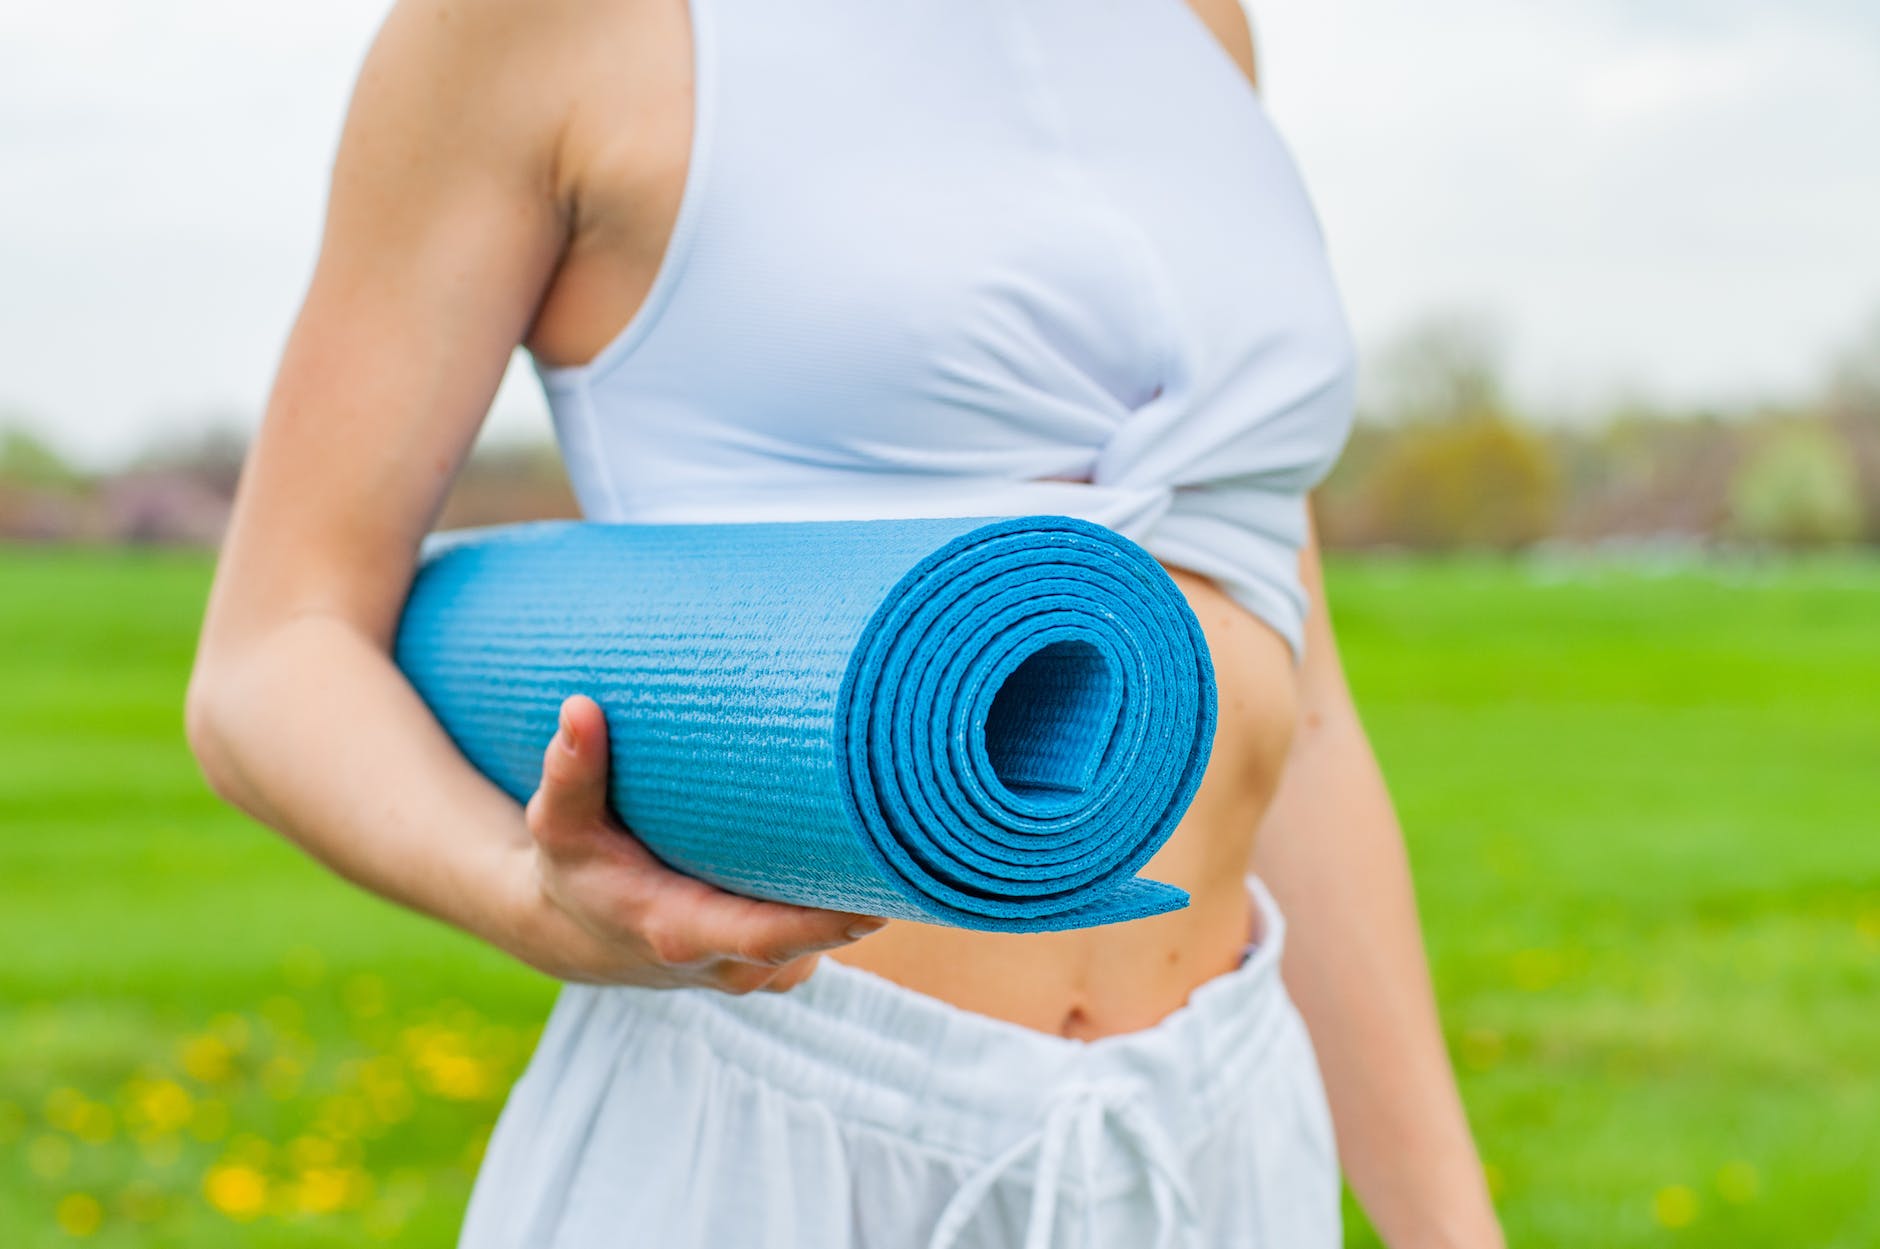 woman standing and holding blue yoga mat
Photo by Dmytro on Pexels.com